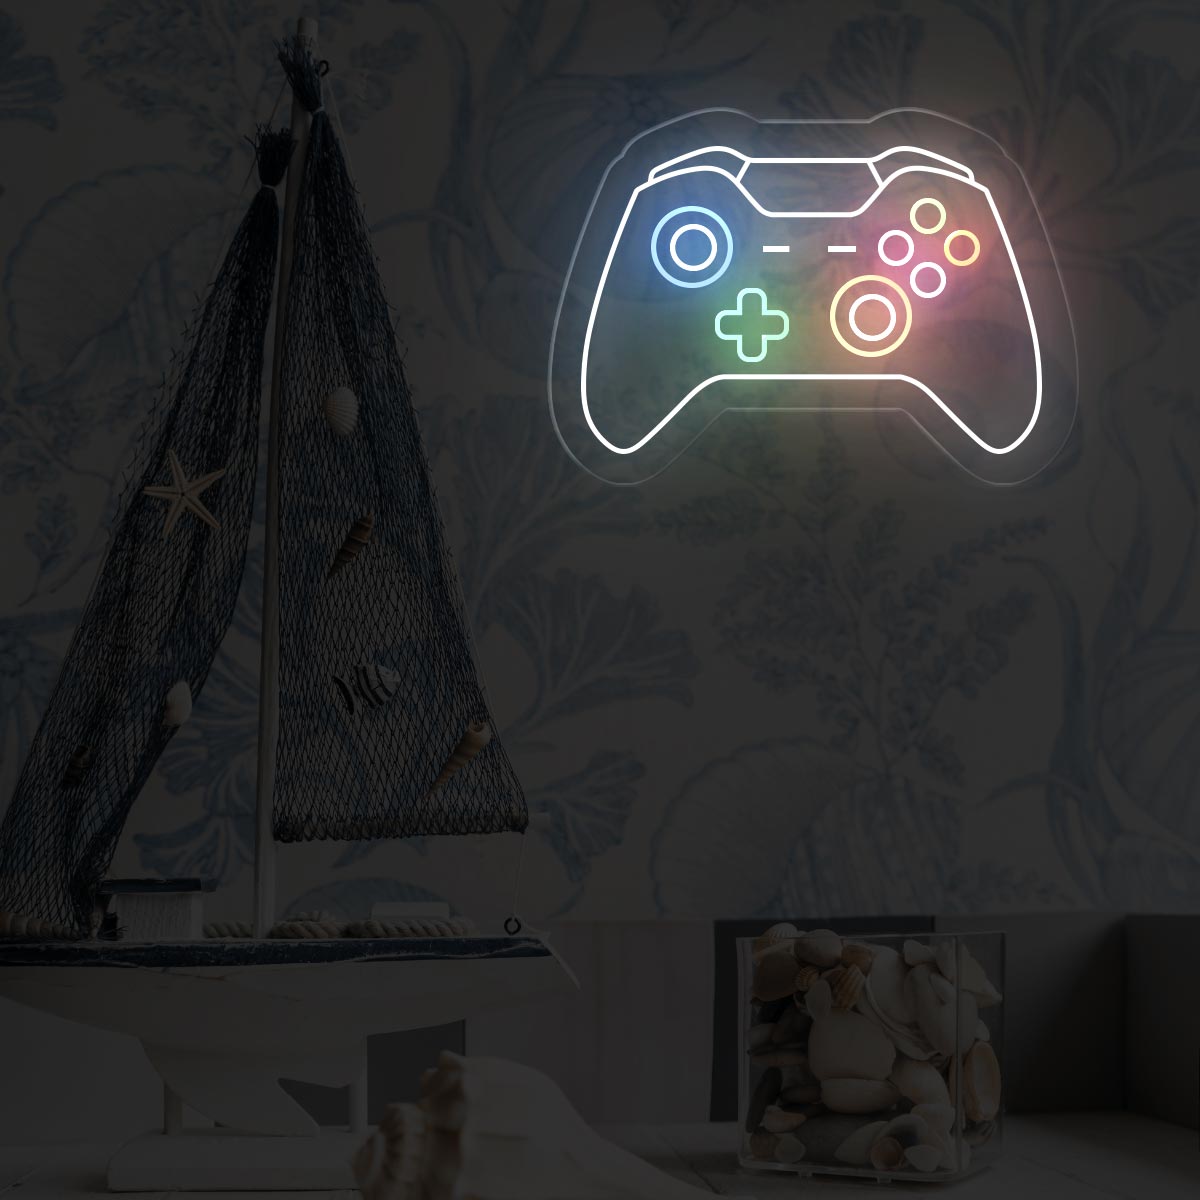 Game Controller Neon Sign - Light Up Your Gaming World - NEONXPERT